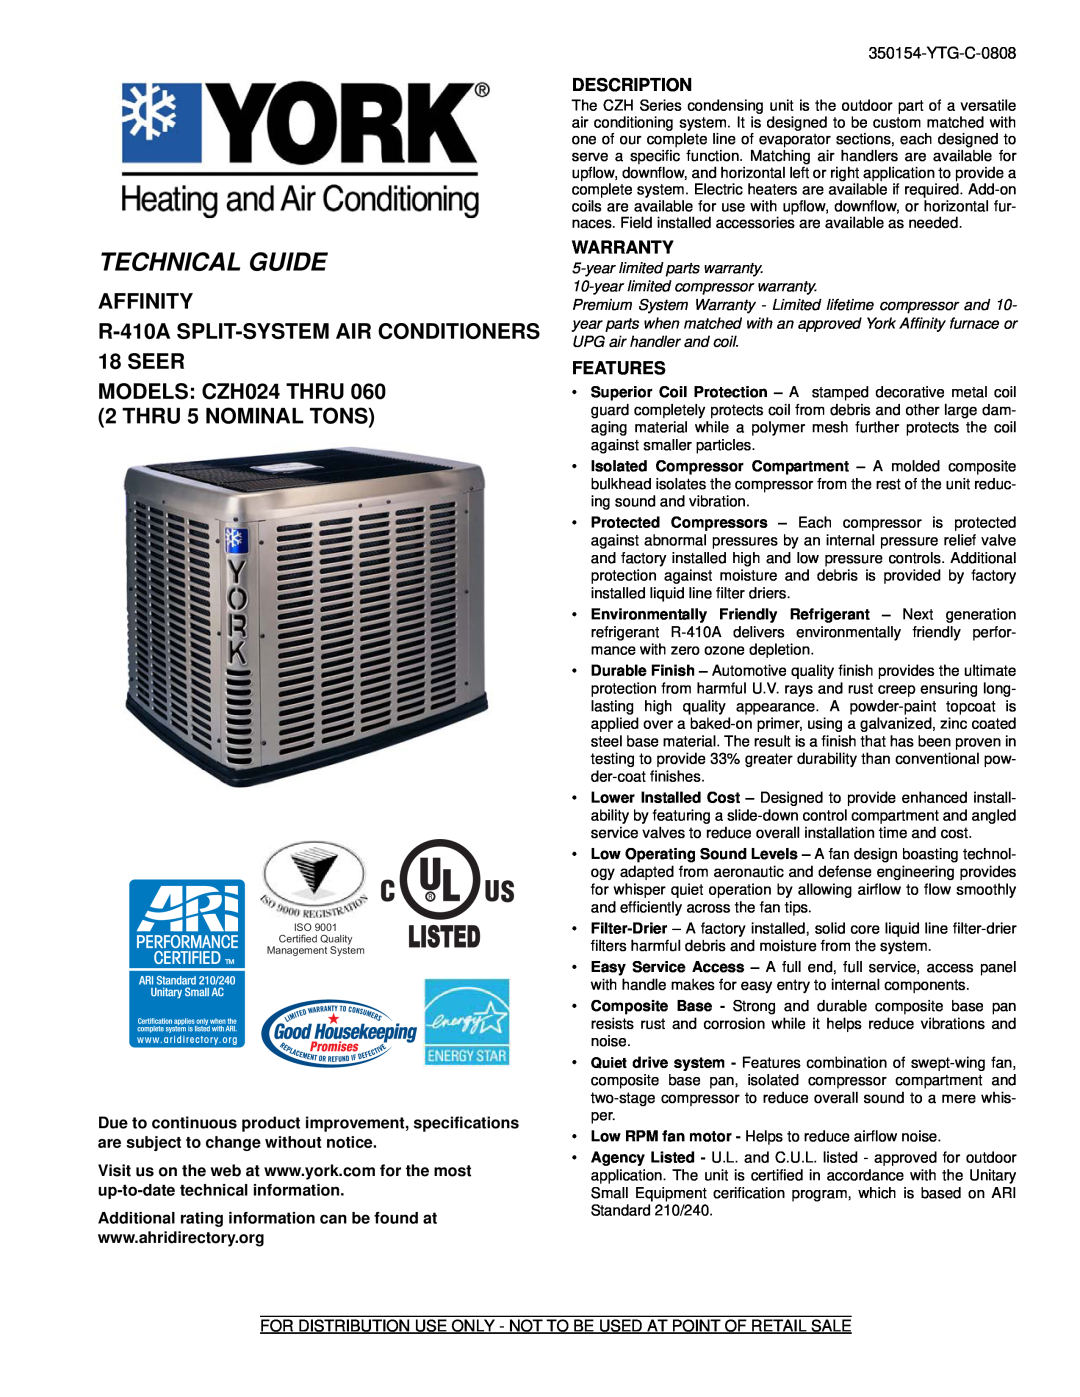 York CZH024 THRU 060 warranty Technical Guide, Affinity, R-410A SPLIT-SYSTEMAIR CONDITIONERS 18 SEER 